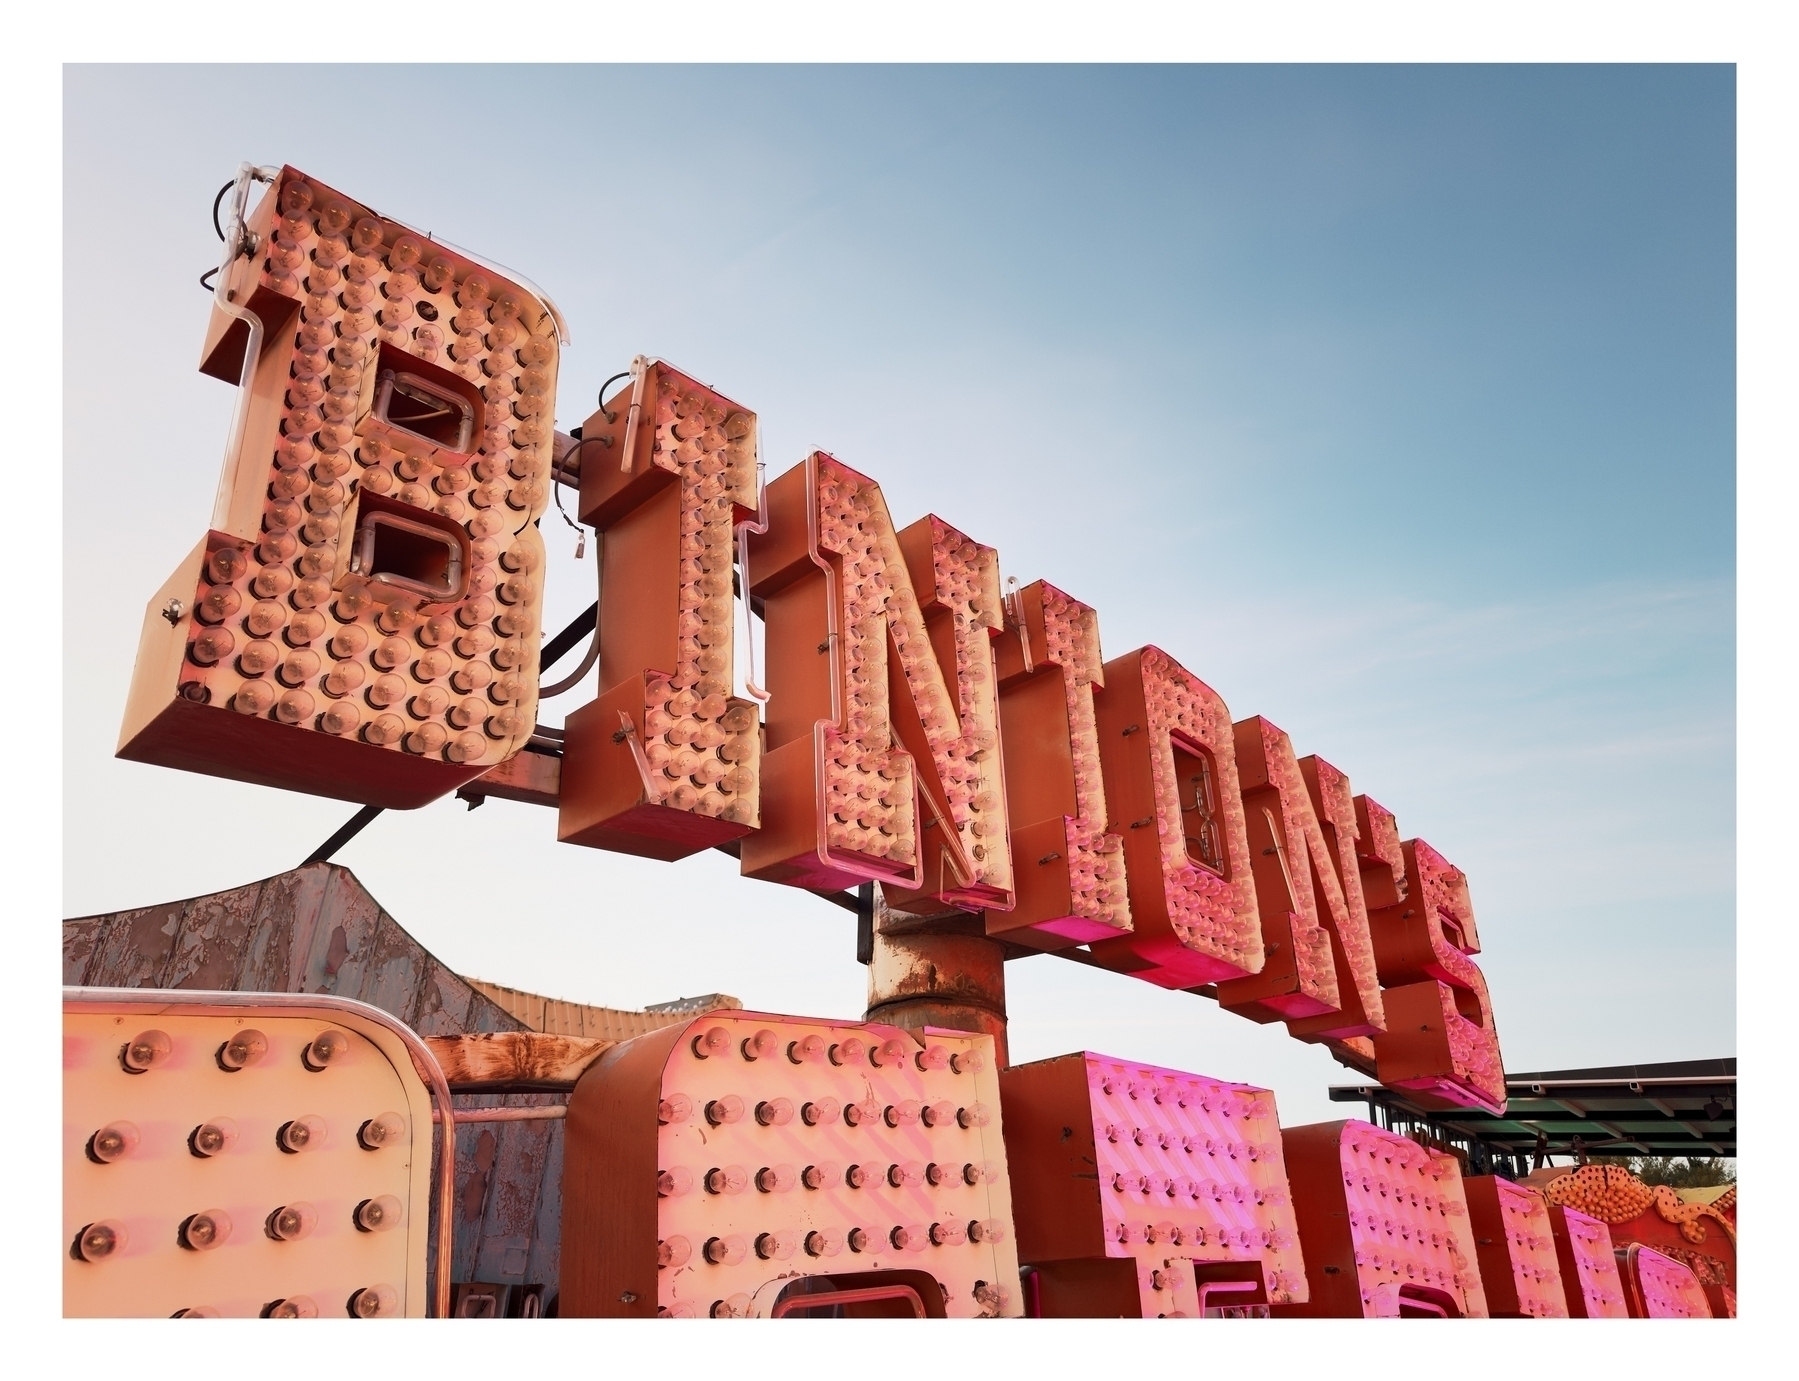 A weathered, pink neon sign spelling “BINION against a clear sky, mounted on rusted structures suggests a retro or abandoned setting.